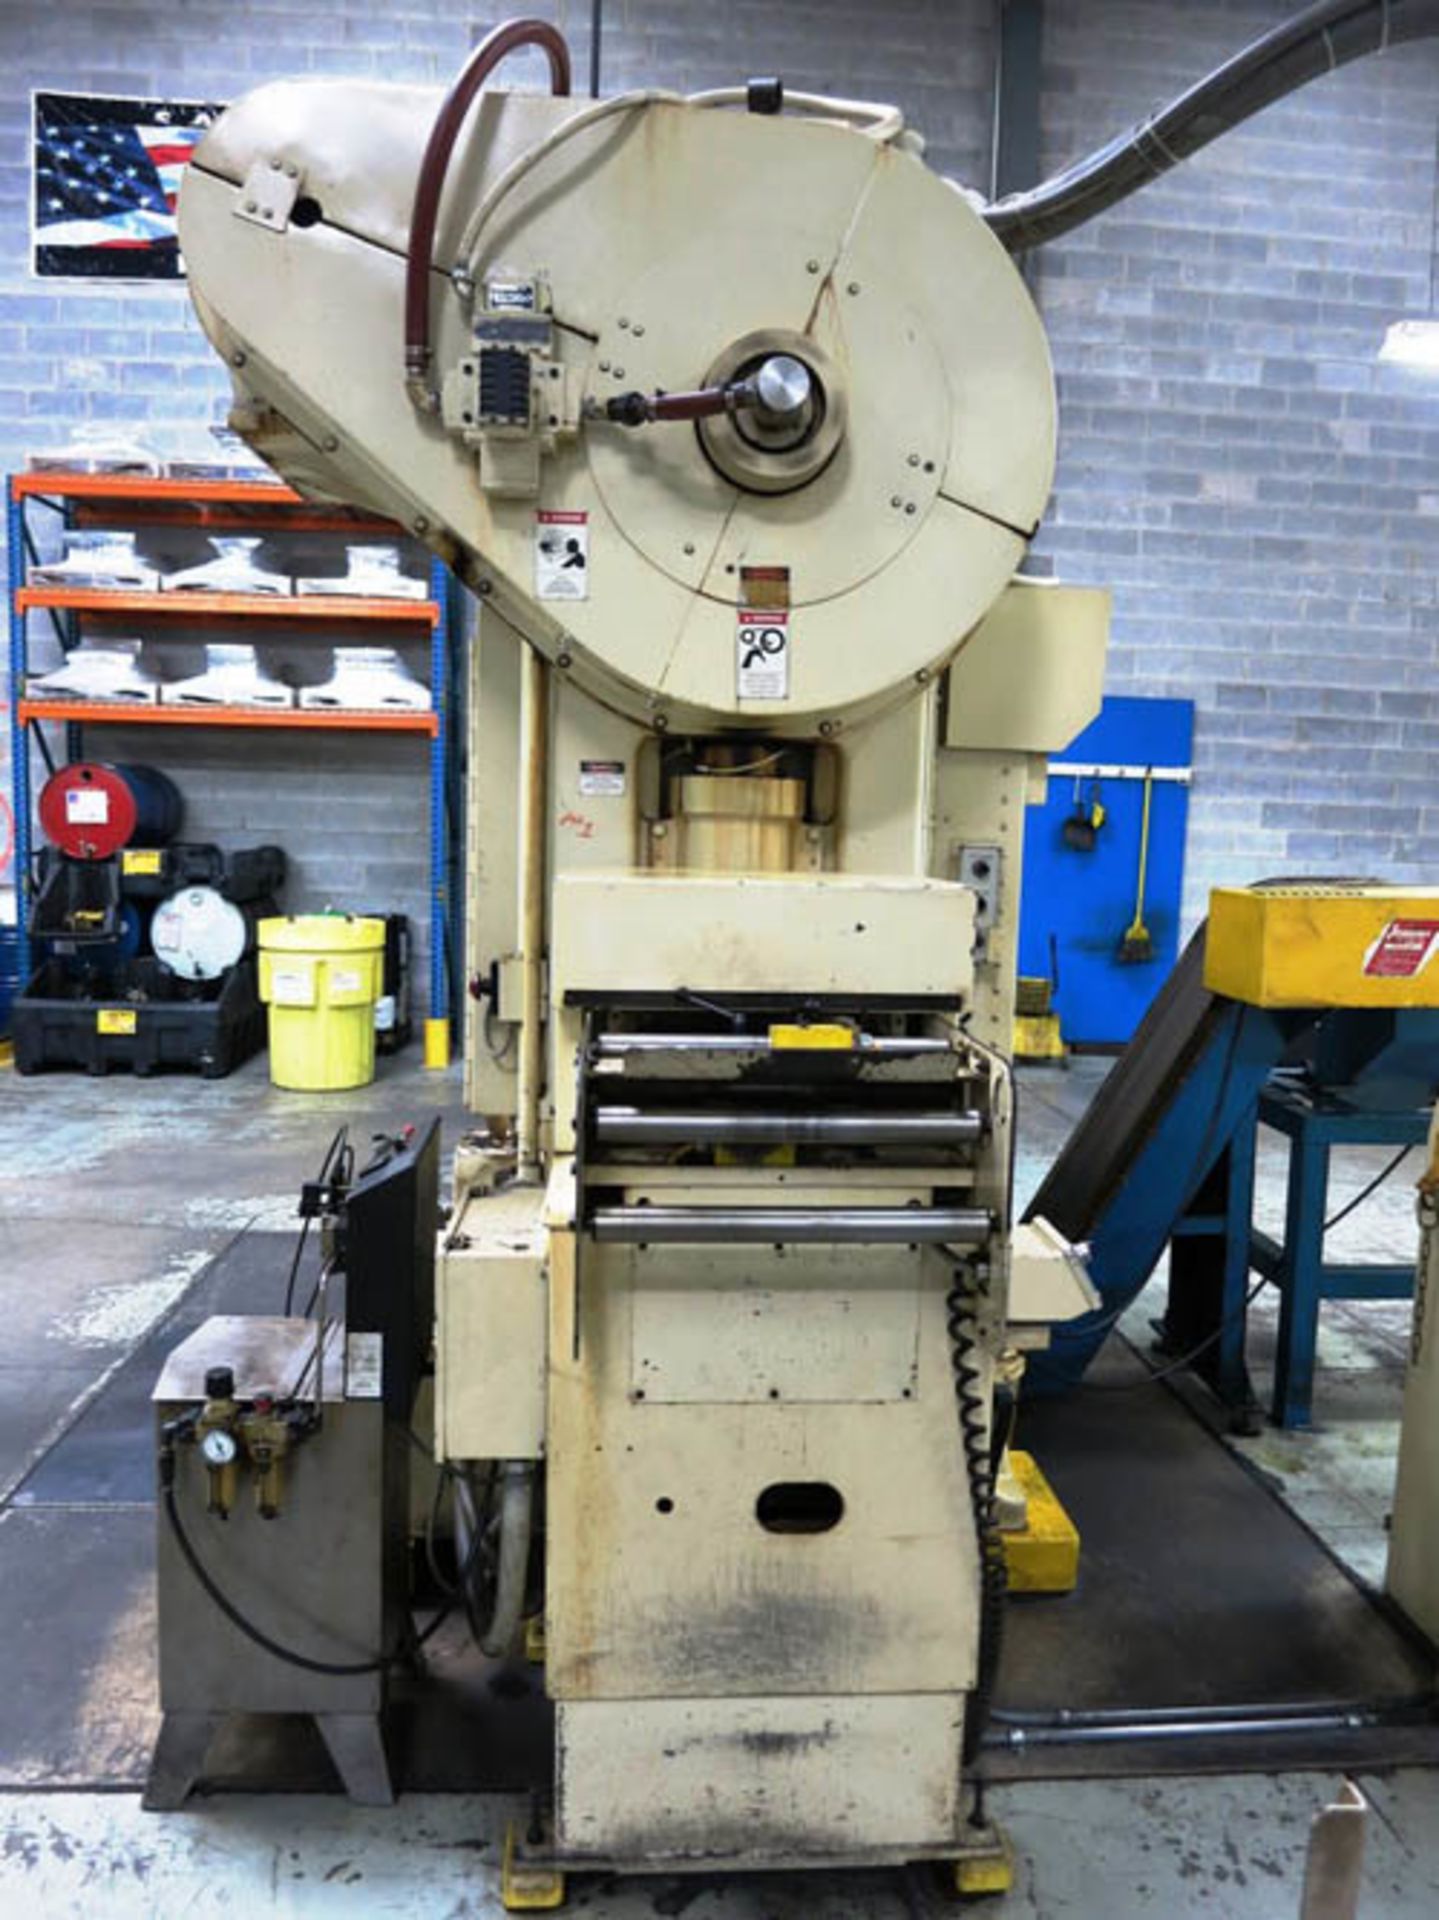 1995 Minster High Speed Production Press, 100 Ton x 48" x 31", Mdl: P2-100-48, S/N: 15159 (7949P) ( - Image 6 of 13